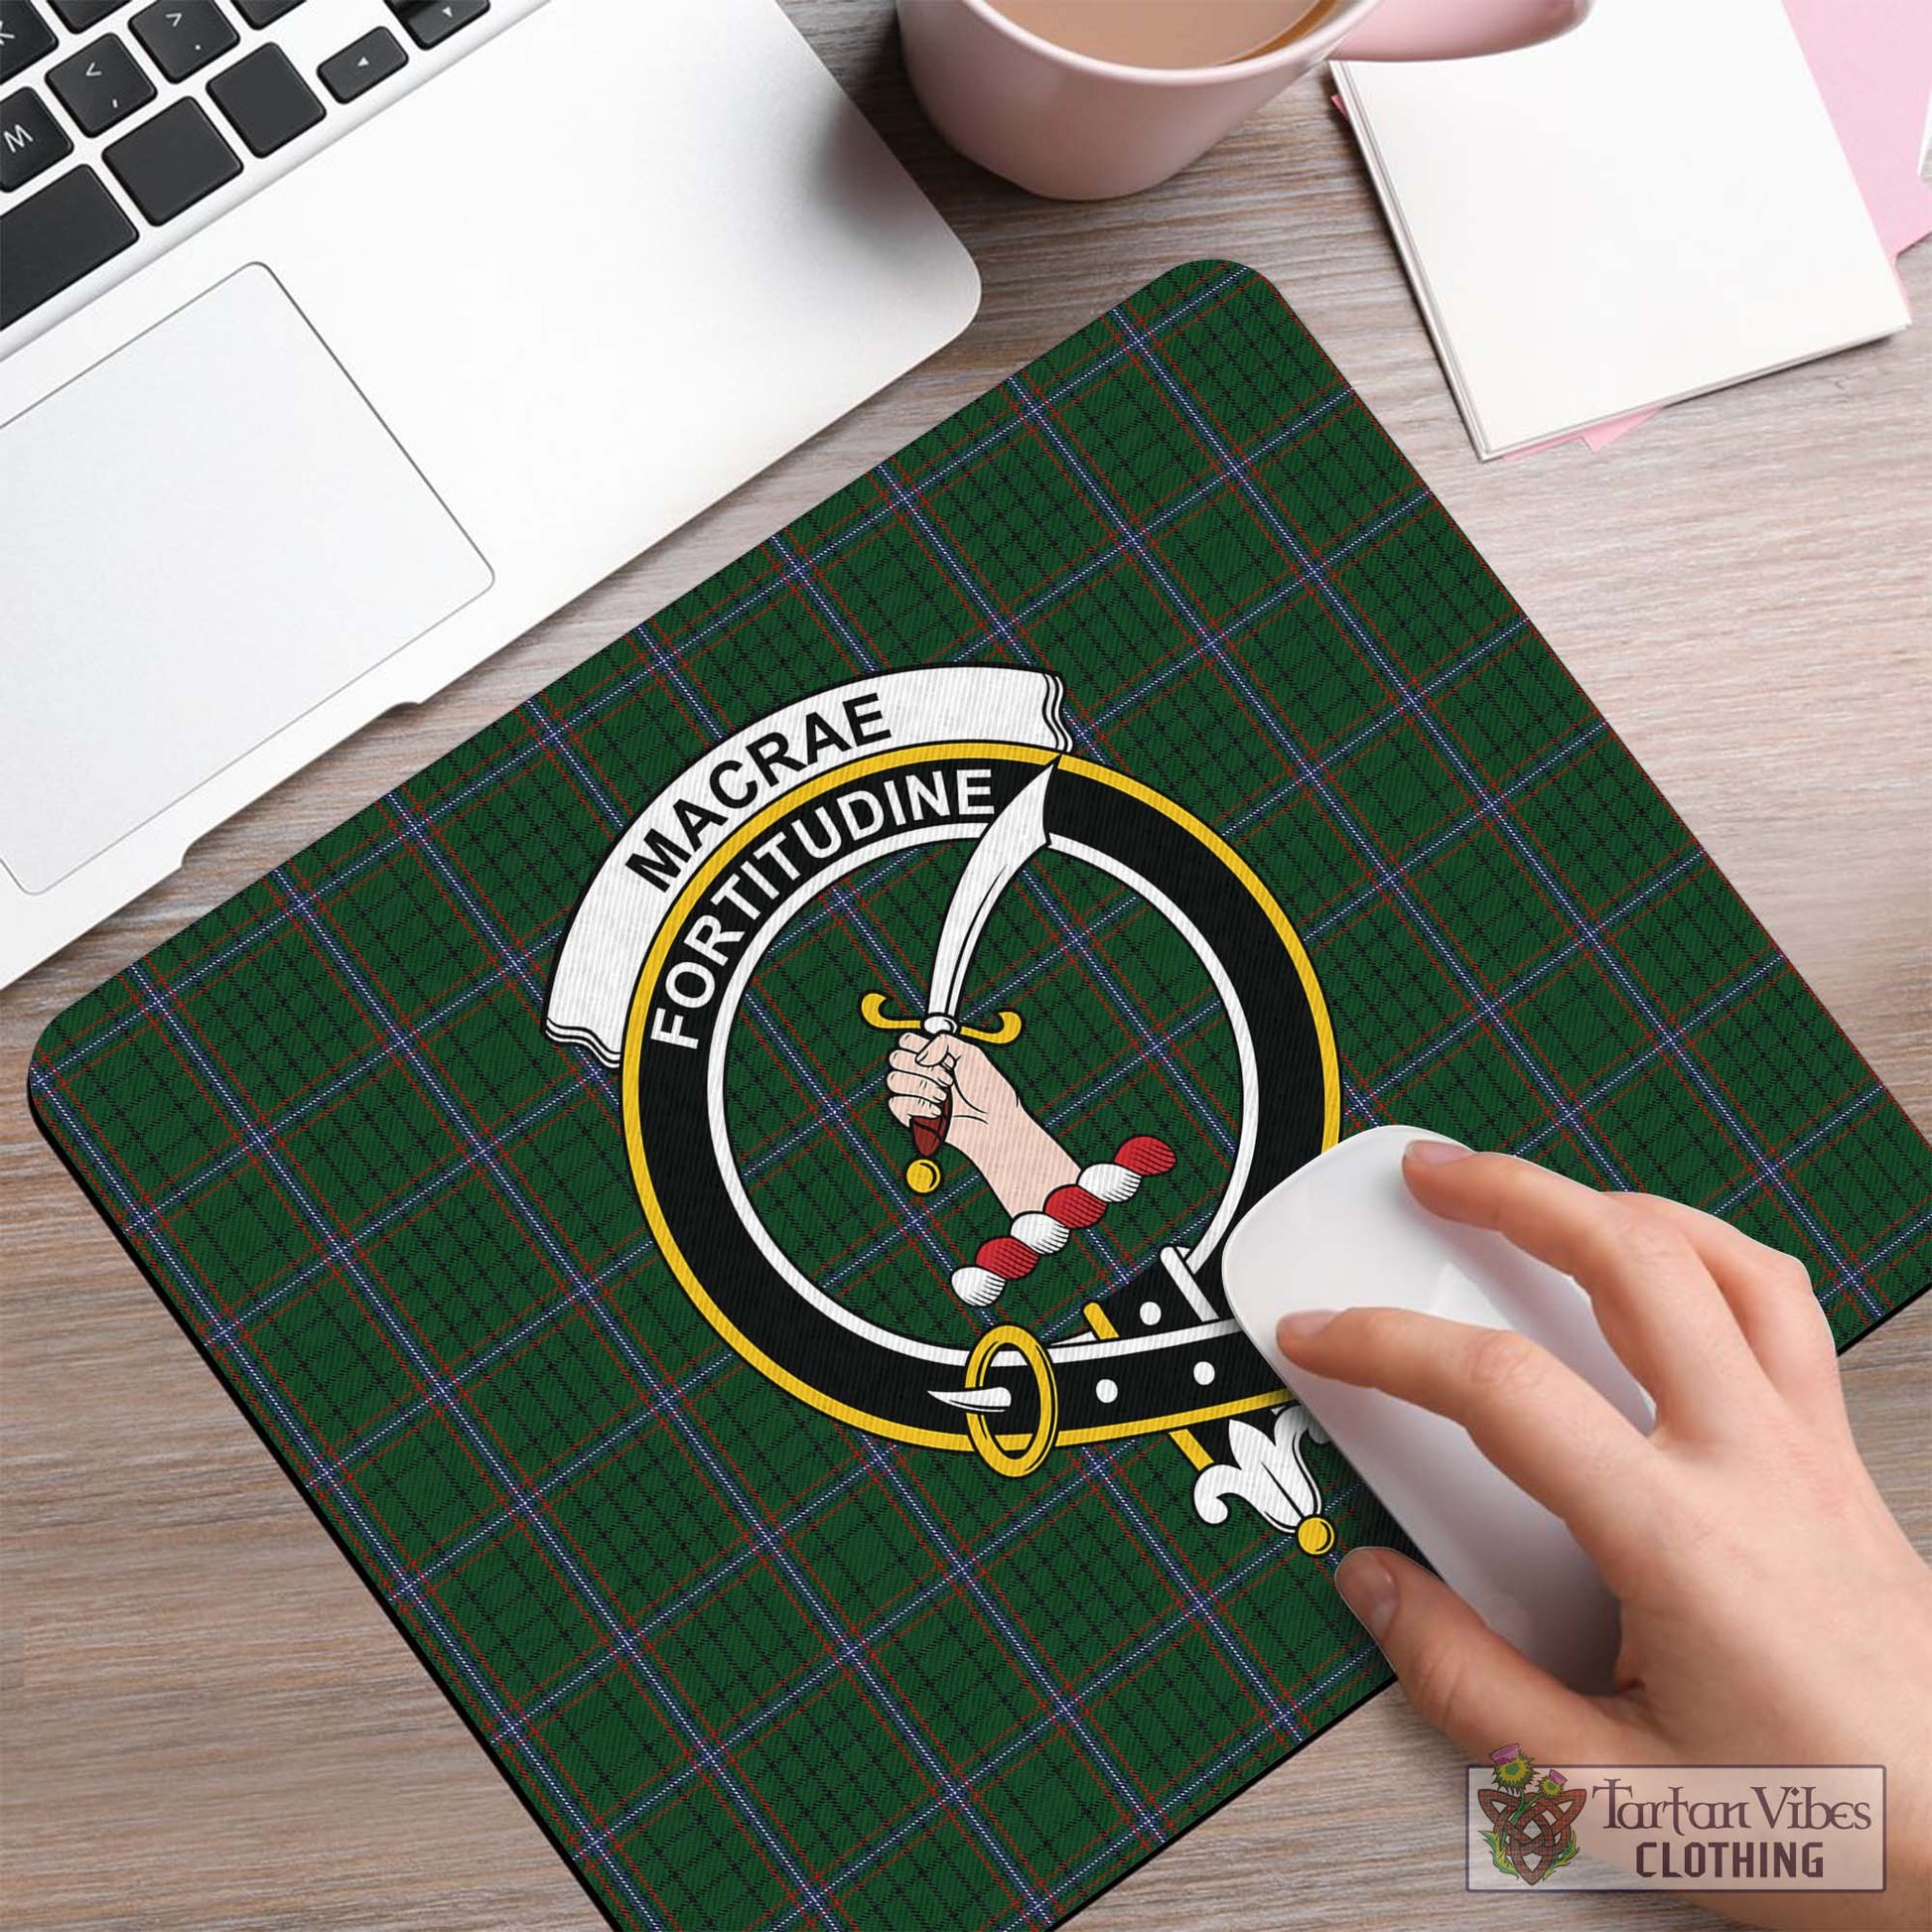 Tartan Vibes Clothing MacRae Tartan Mouse Pad with Family Crest